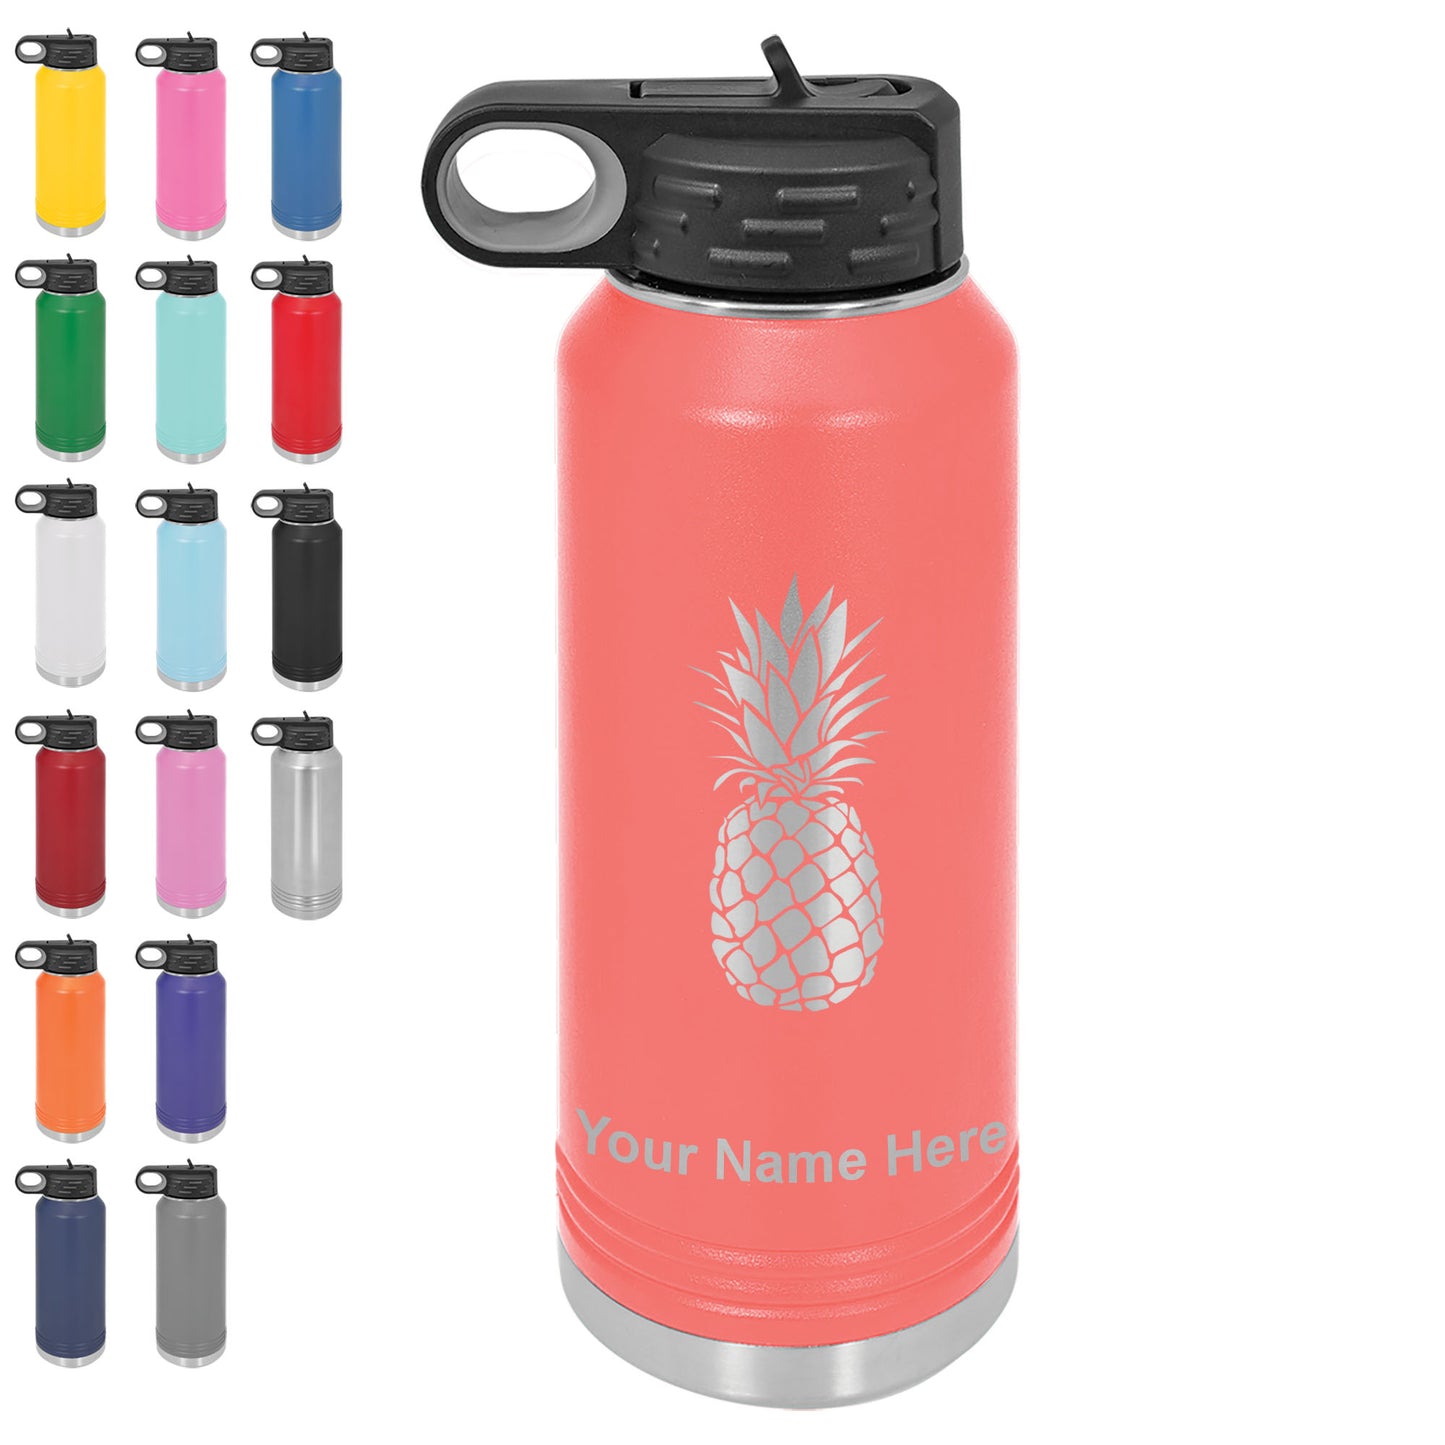 LaserGram 32oz Double Wall Flip Top Water Bottle with Straw, Pineapple, Personalized Engraving Included